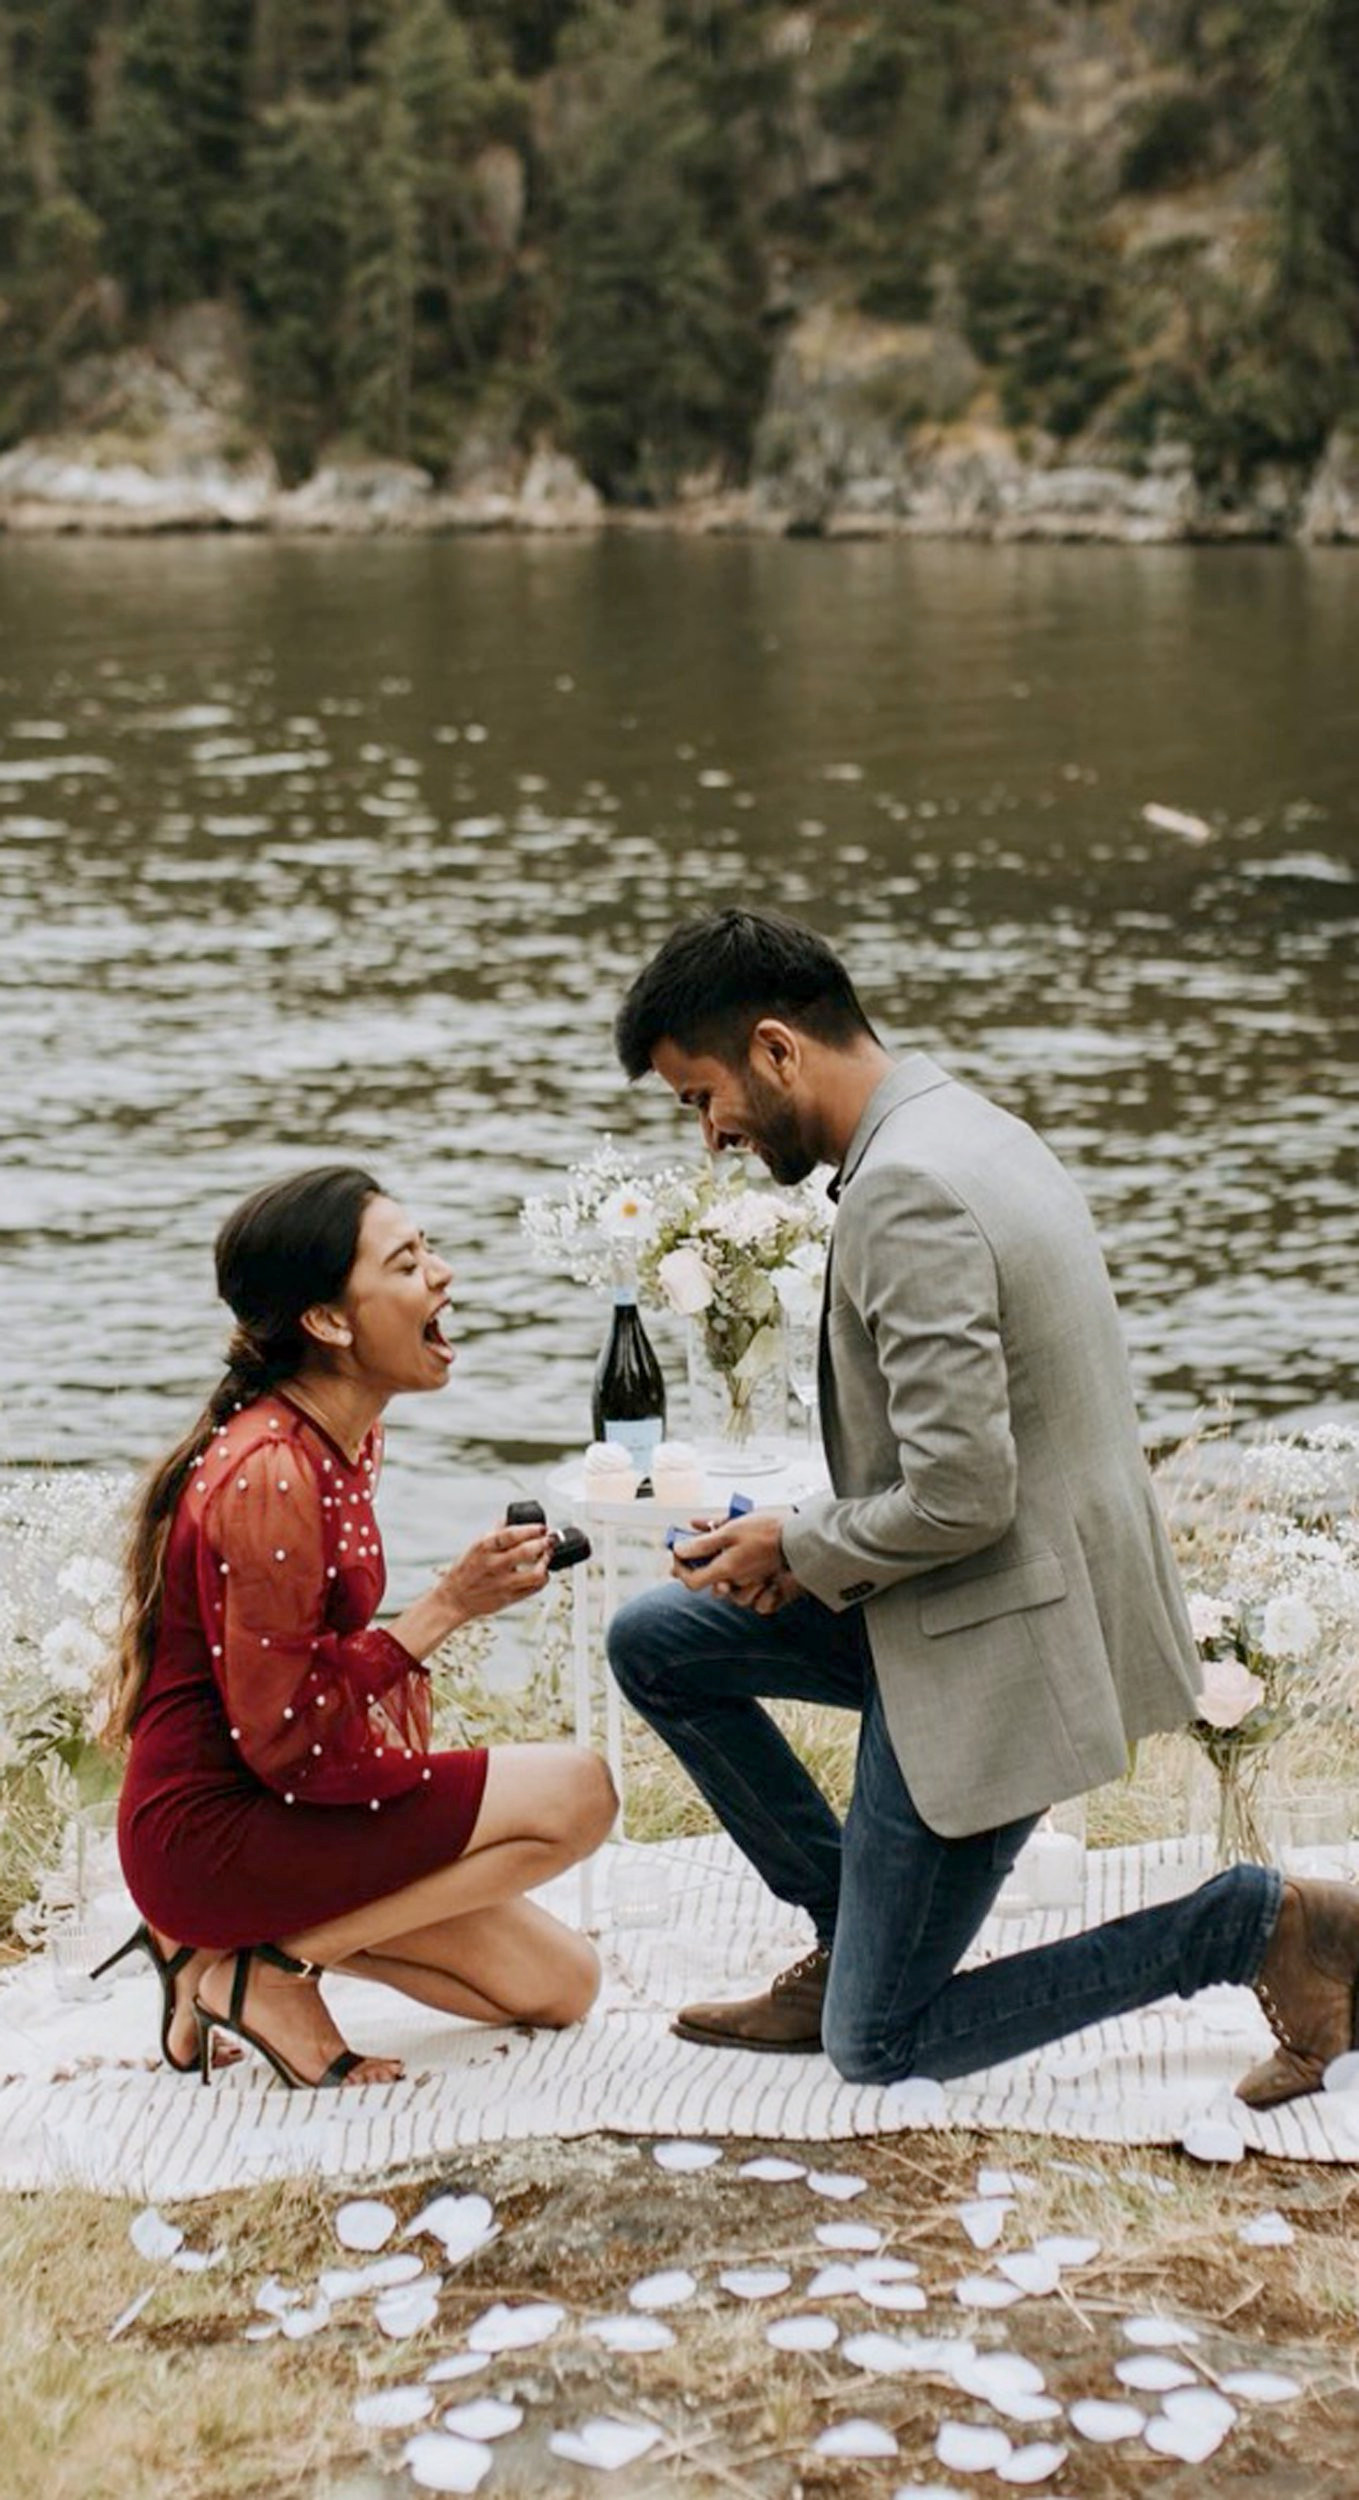 Couple both get same photographer involved in secret proposal plans – but end up asking at the exact same time